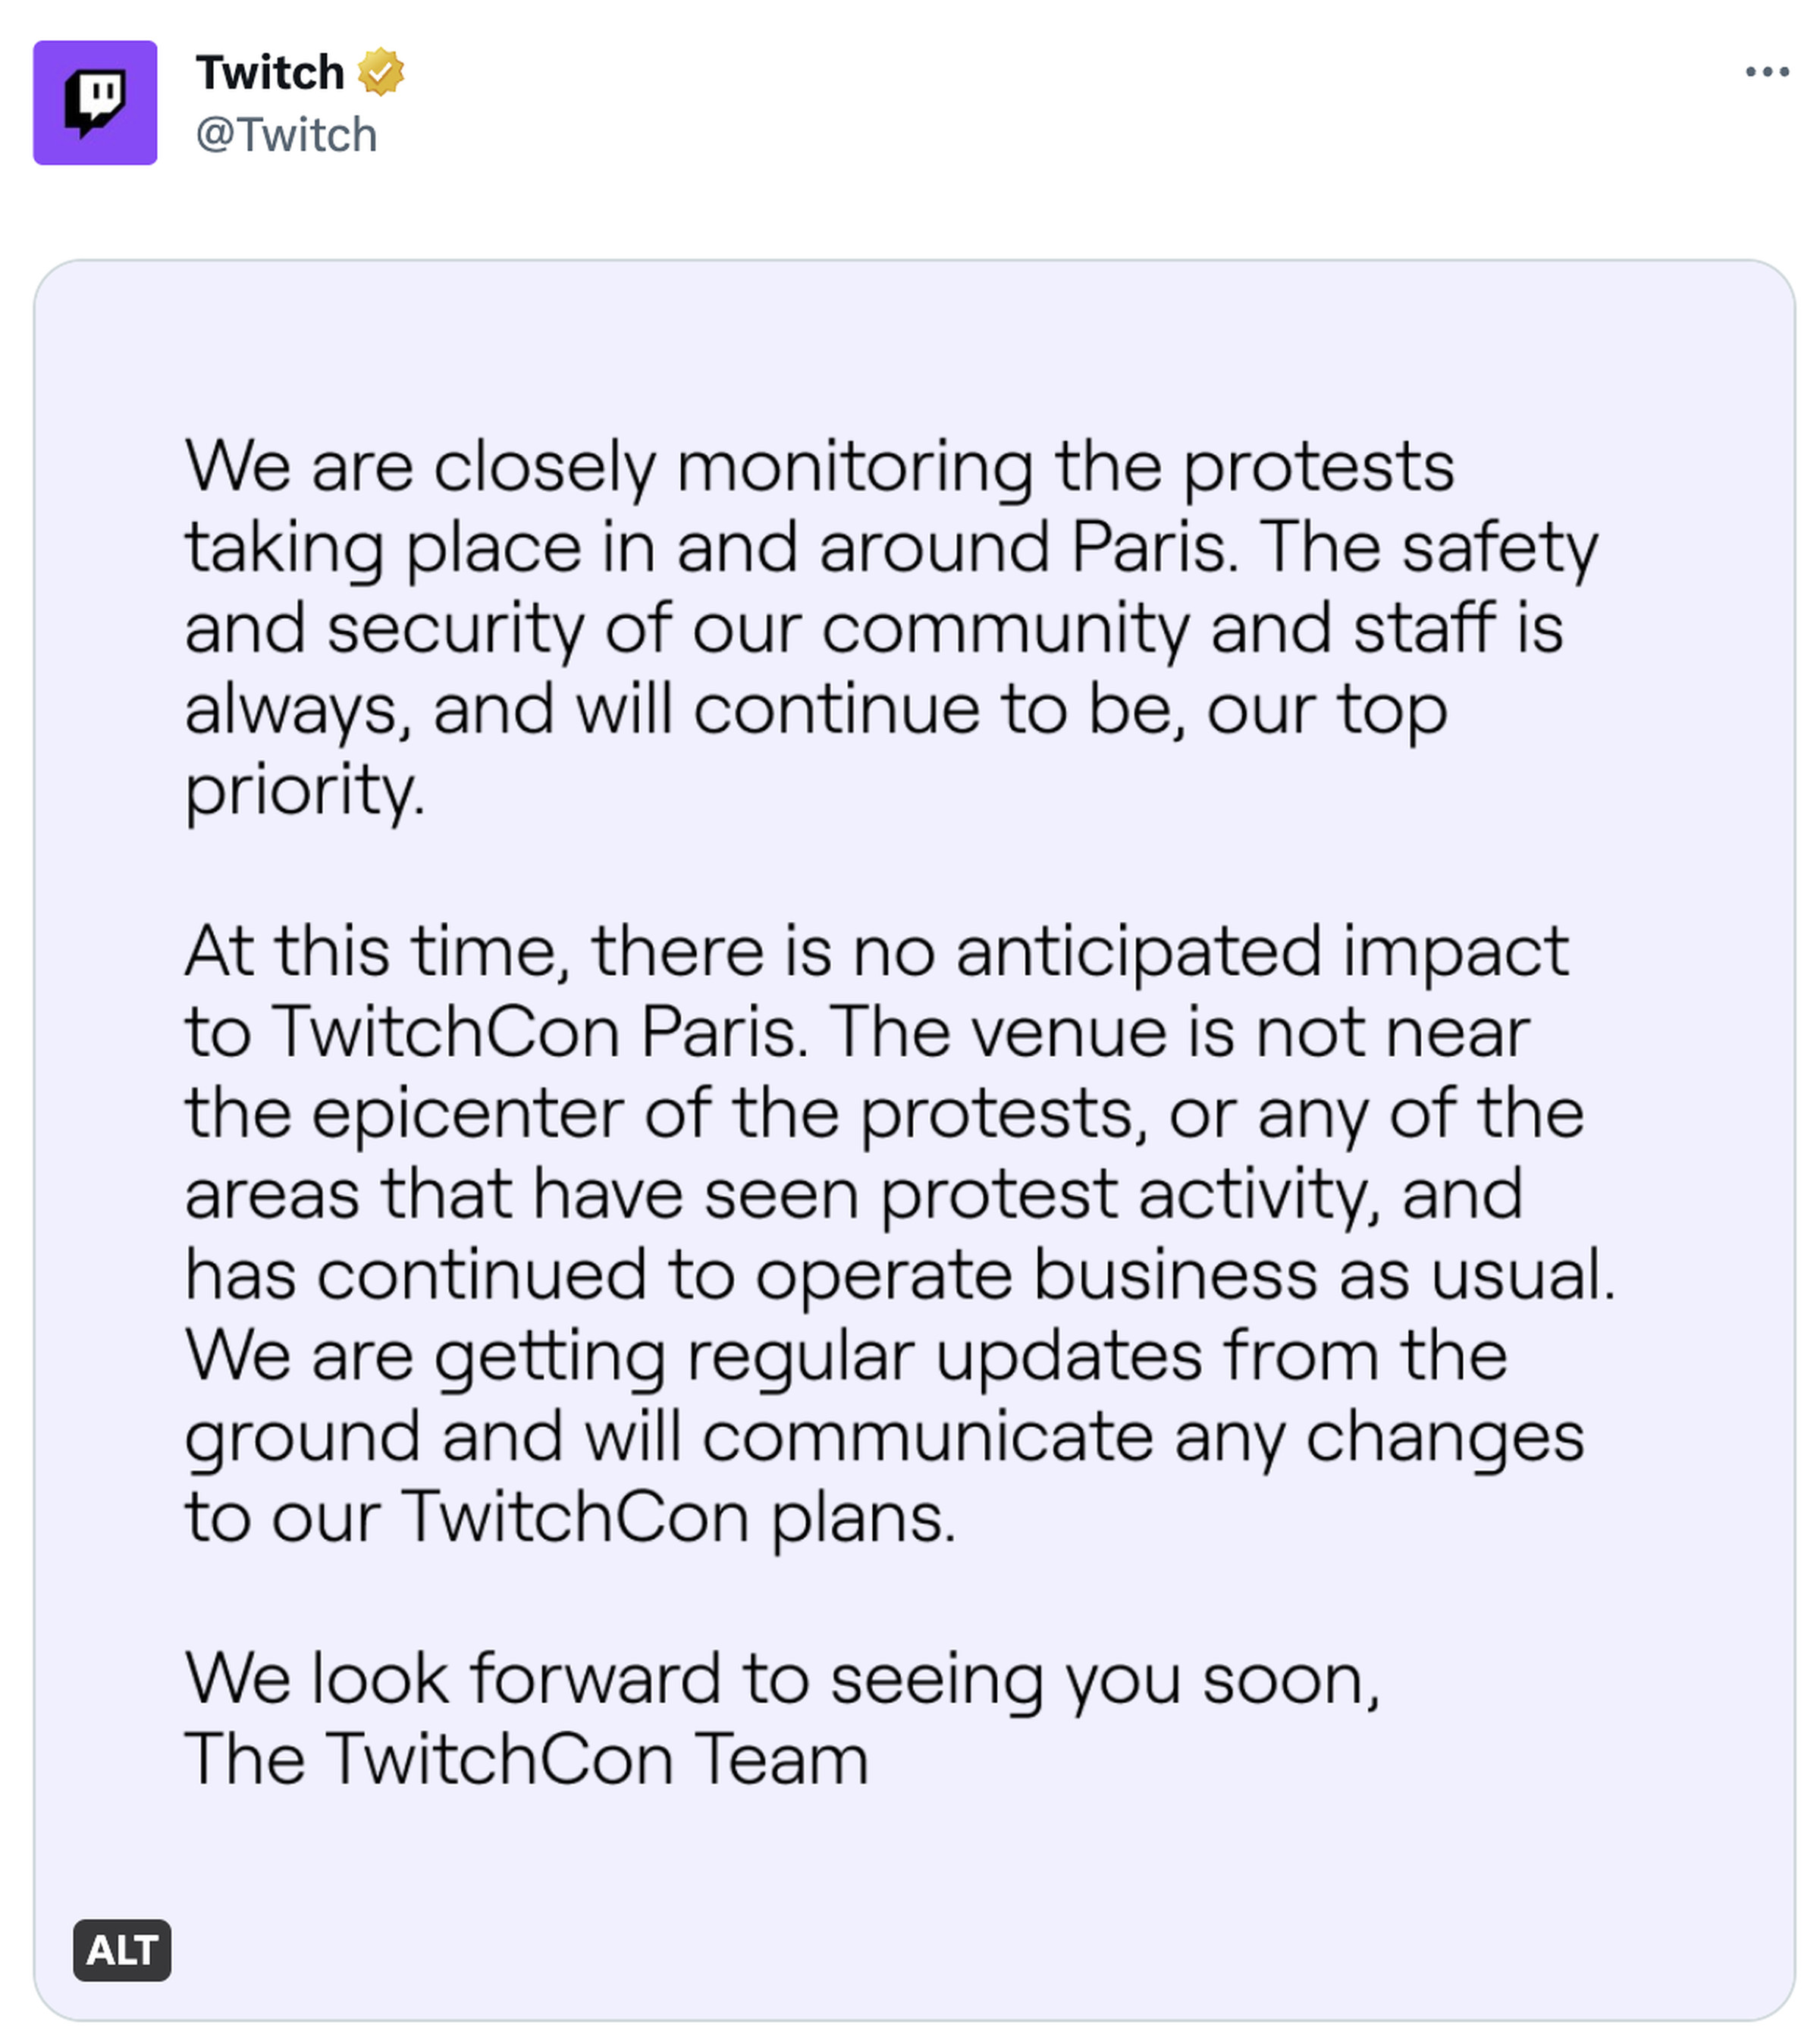 A screenshot of a tweet about TwitchCon Paris shared by the Twitch account.